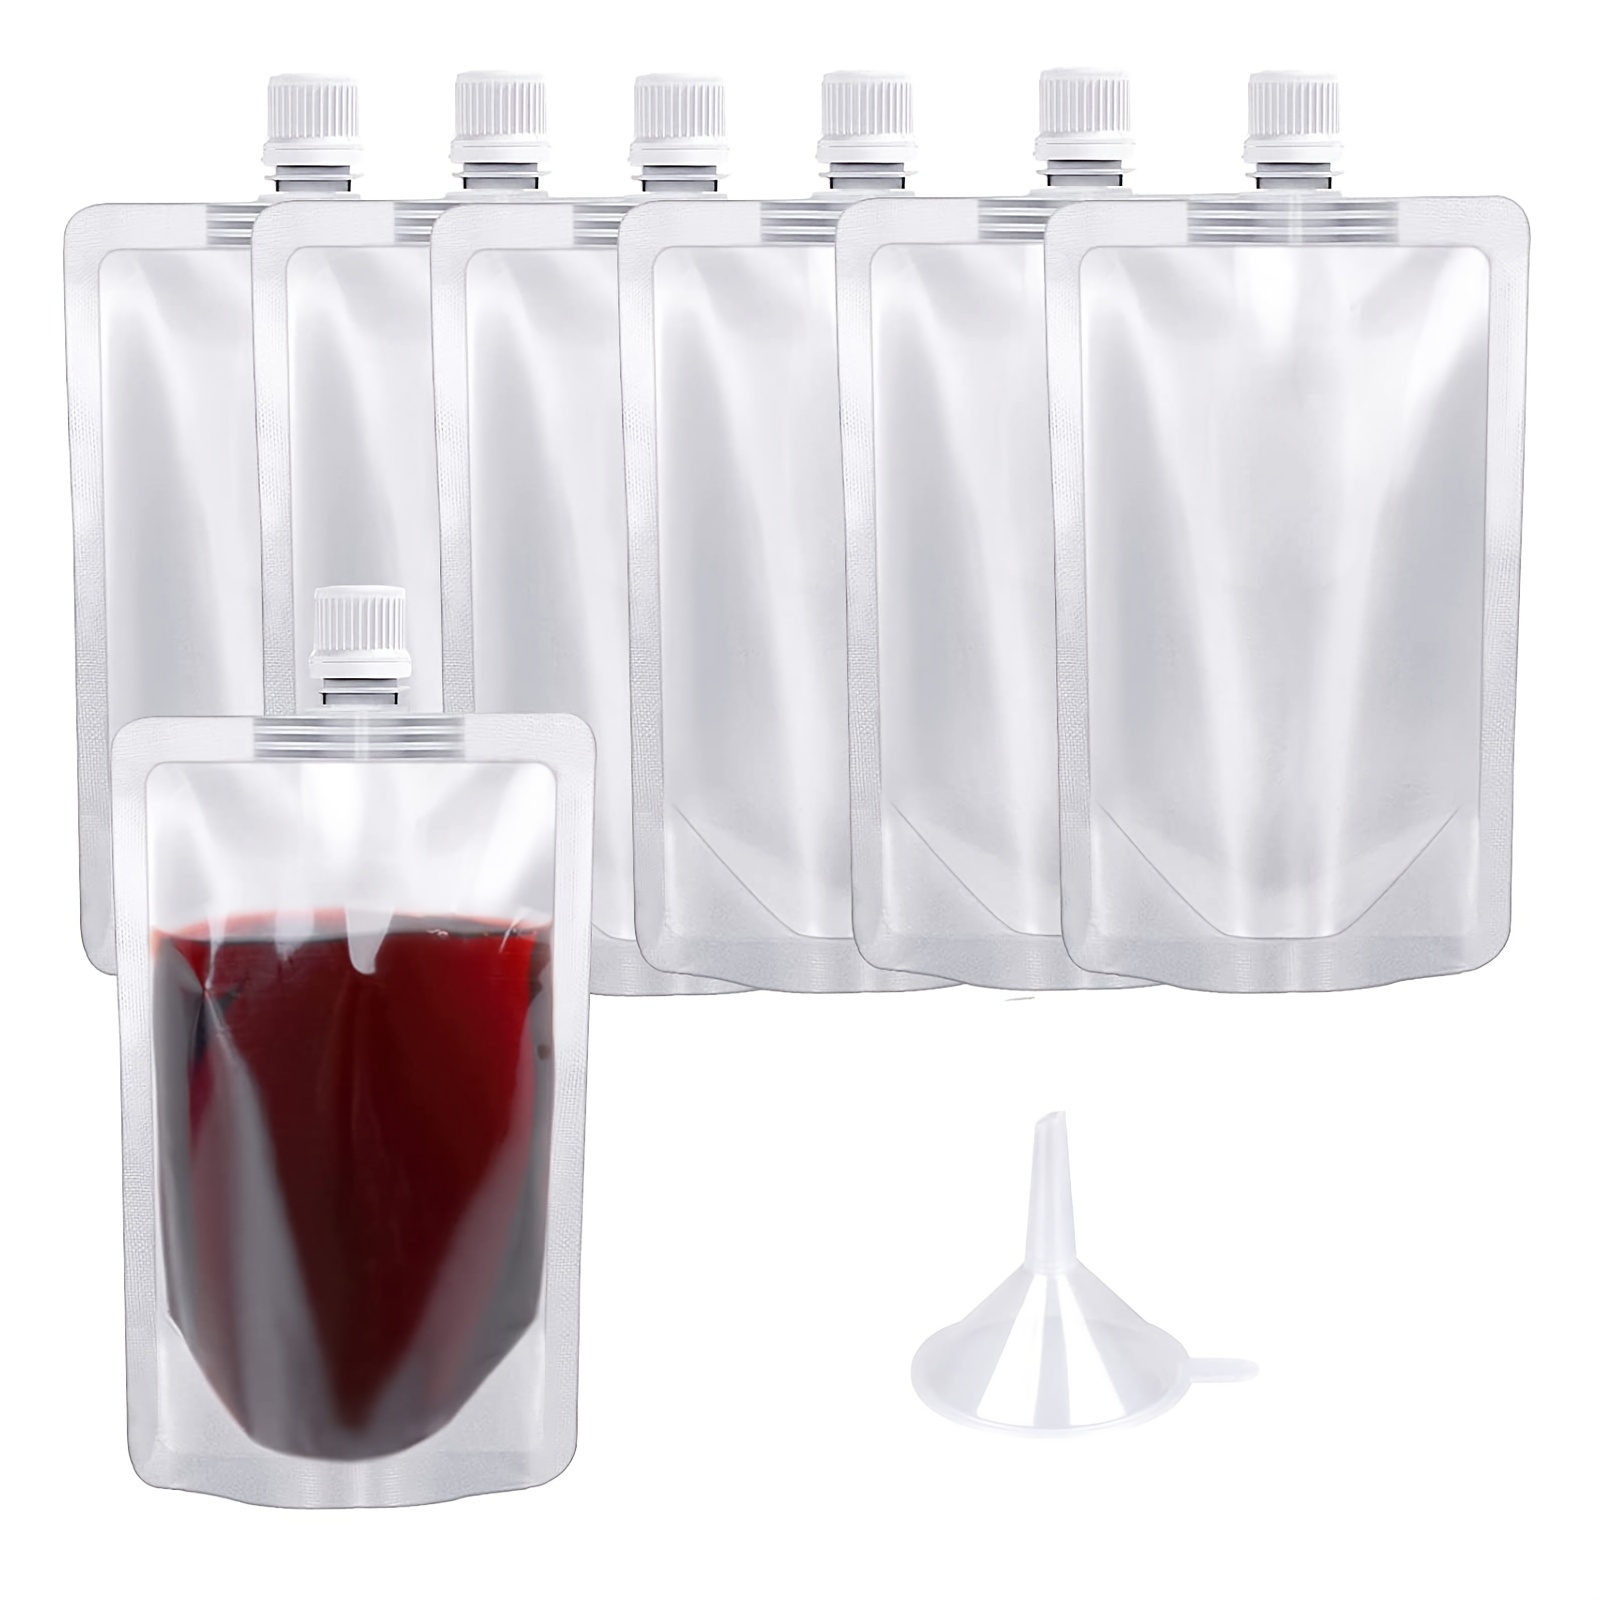 Concealable Flasks Reusable Drinking Bag - 5 Pack 32oz Plastic Flask for  Liquor Cruise Pouch Hidden Sneak Alcohol Travel Drinking Flask Kits,Travel